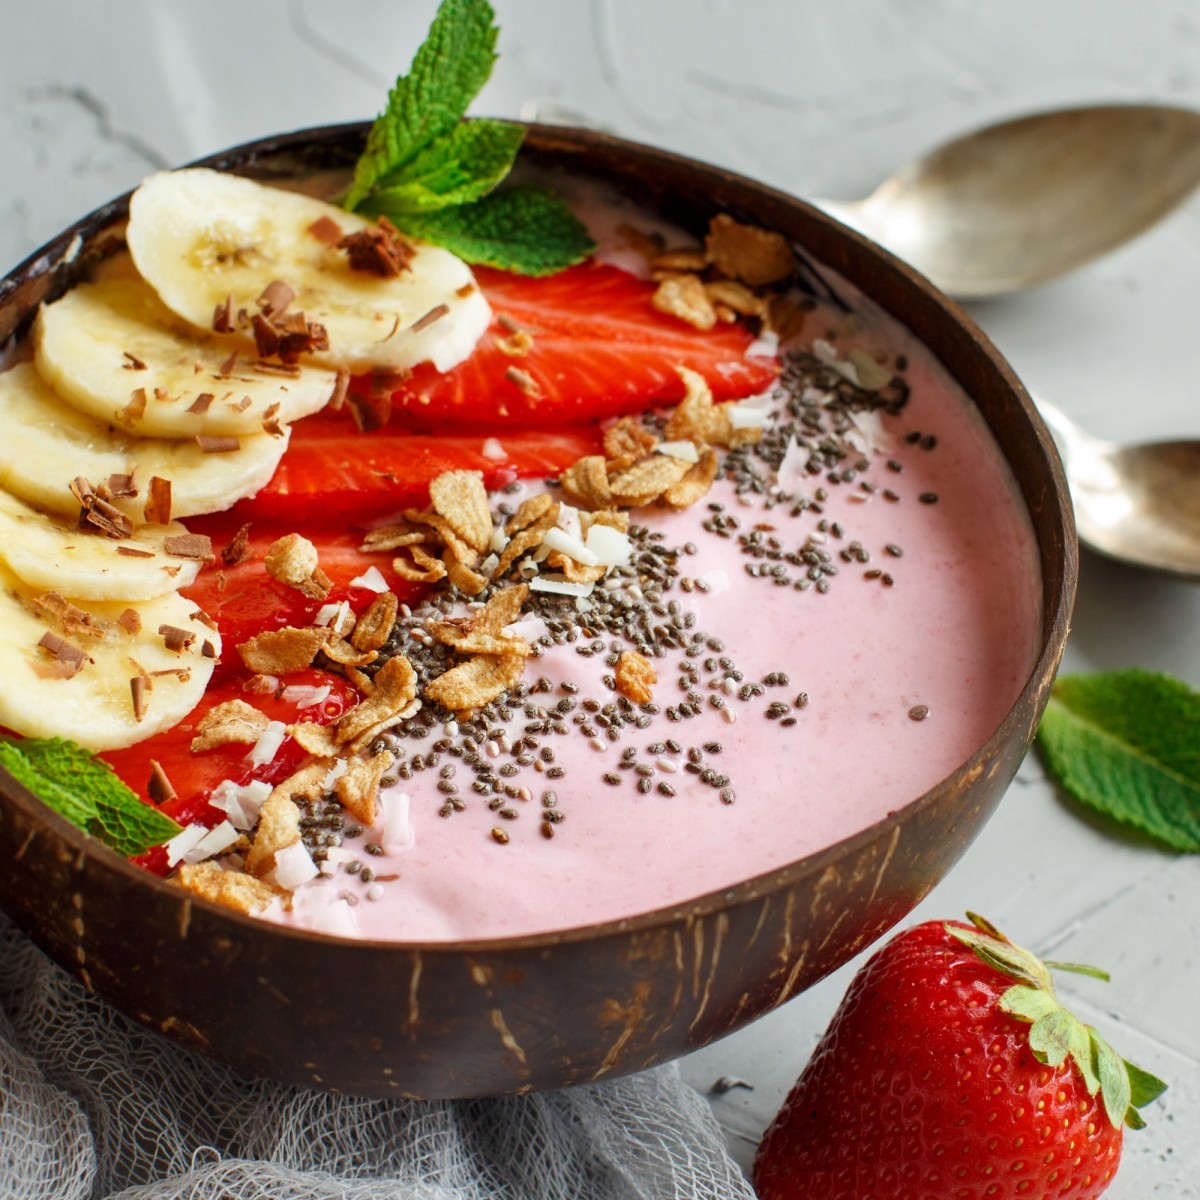 How To Make A Smoothie Bowl: 100 Of The Most Beautiful Smoothie Bowl Toppings